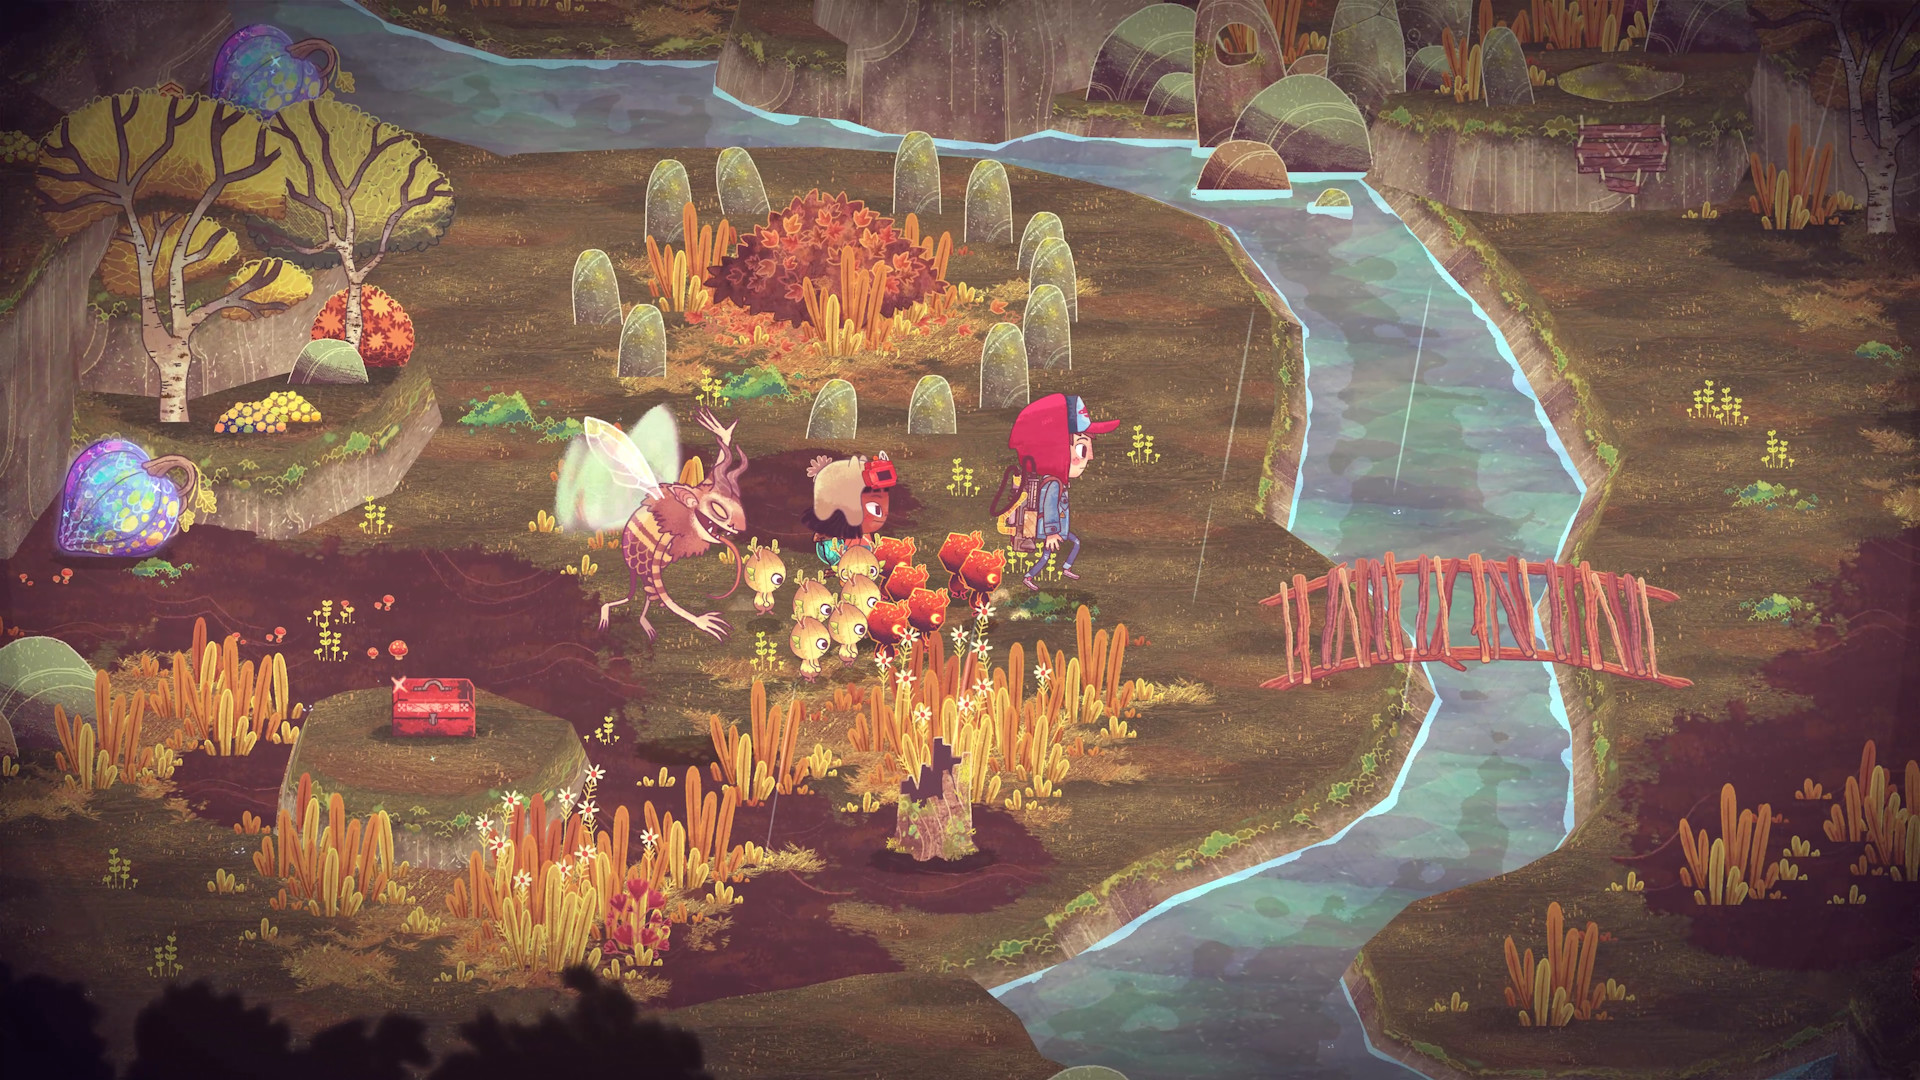 The Wild at Heart PS4 review